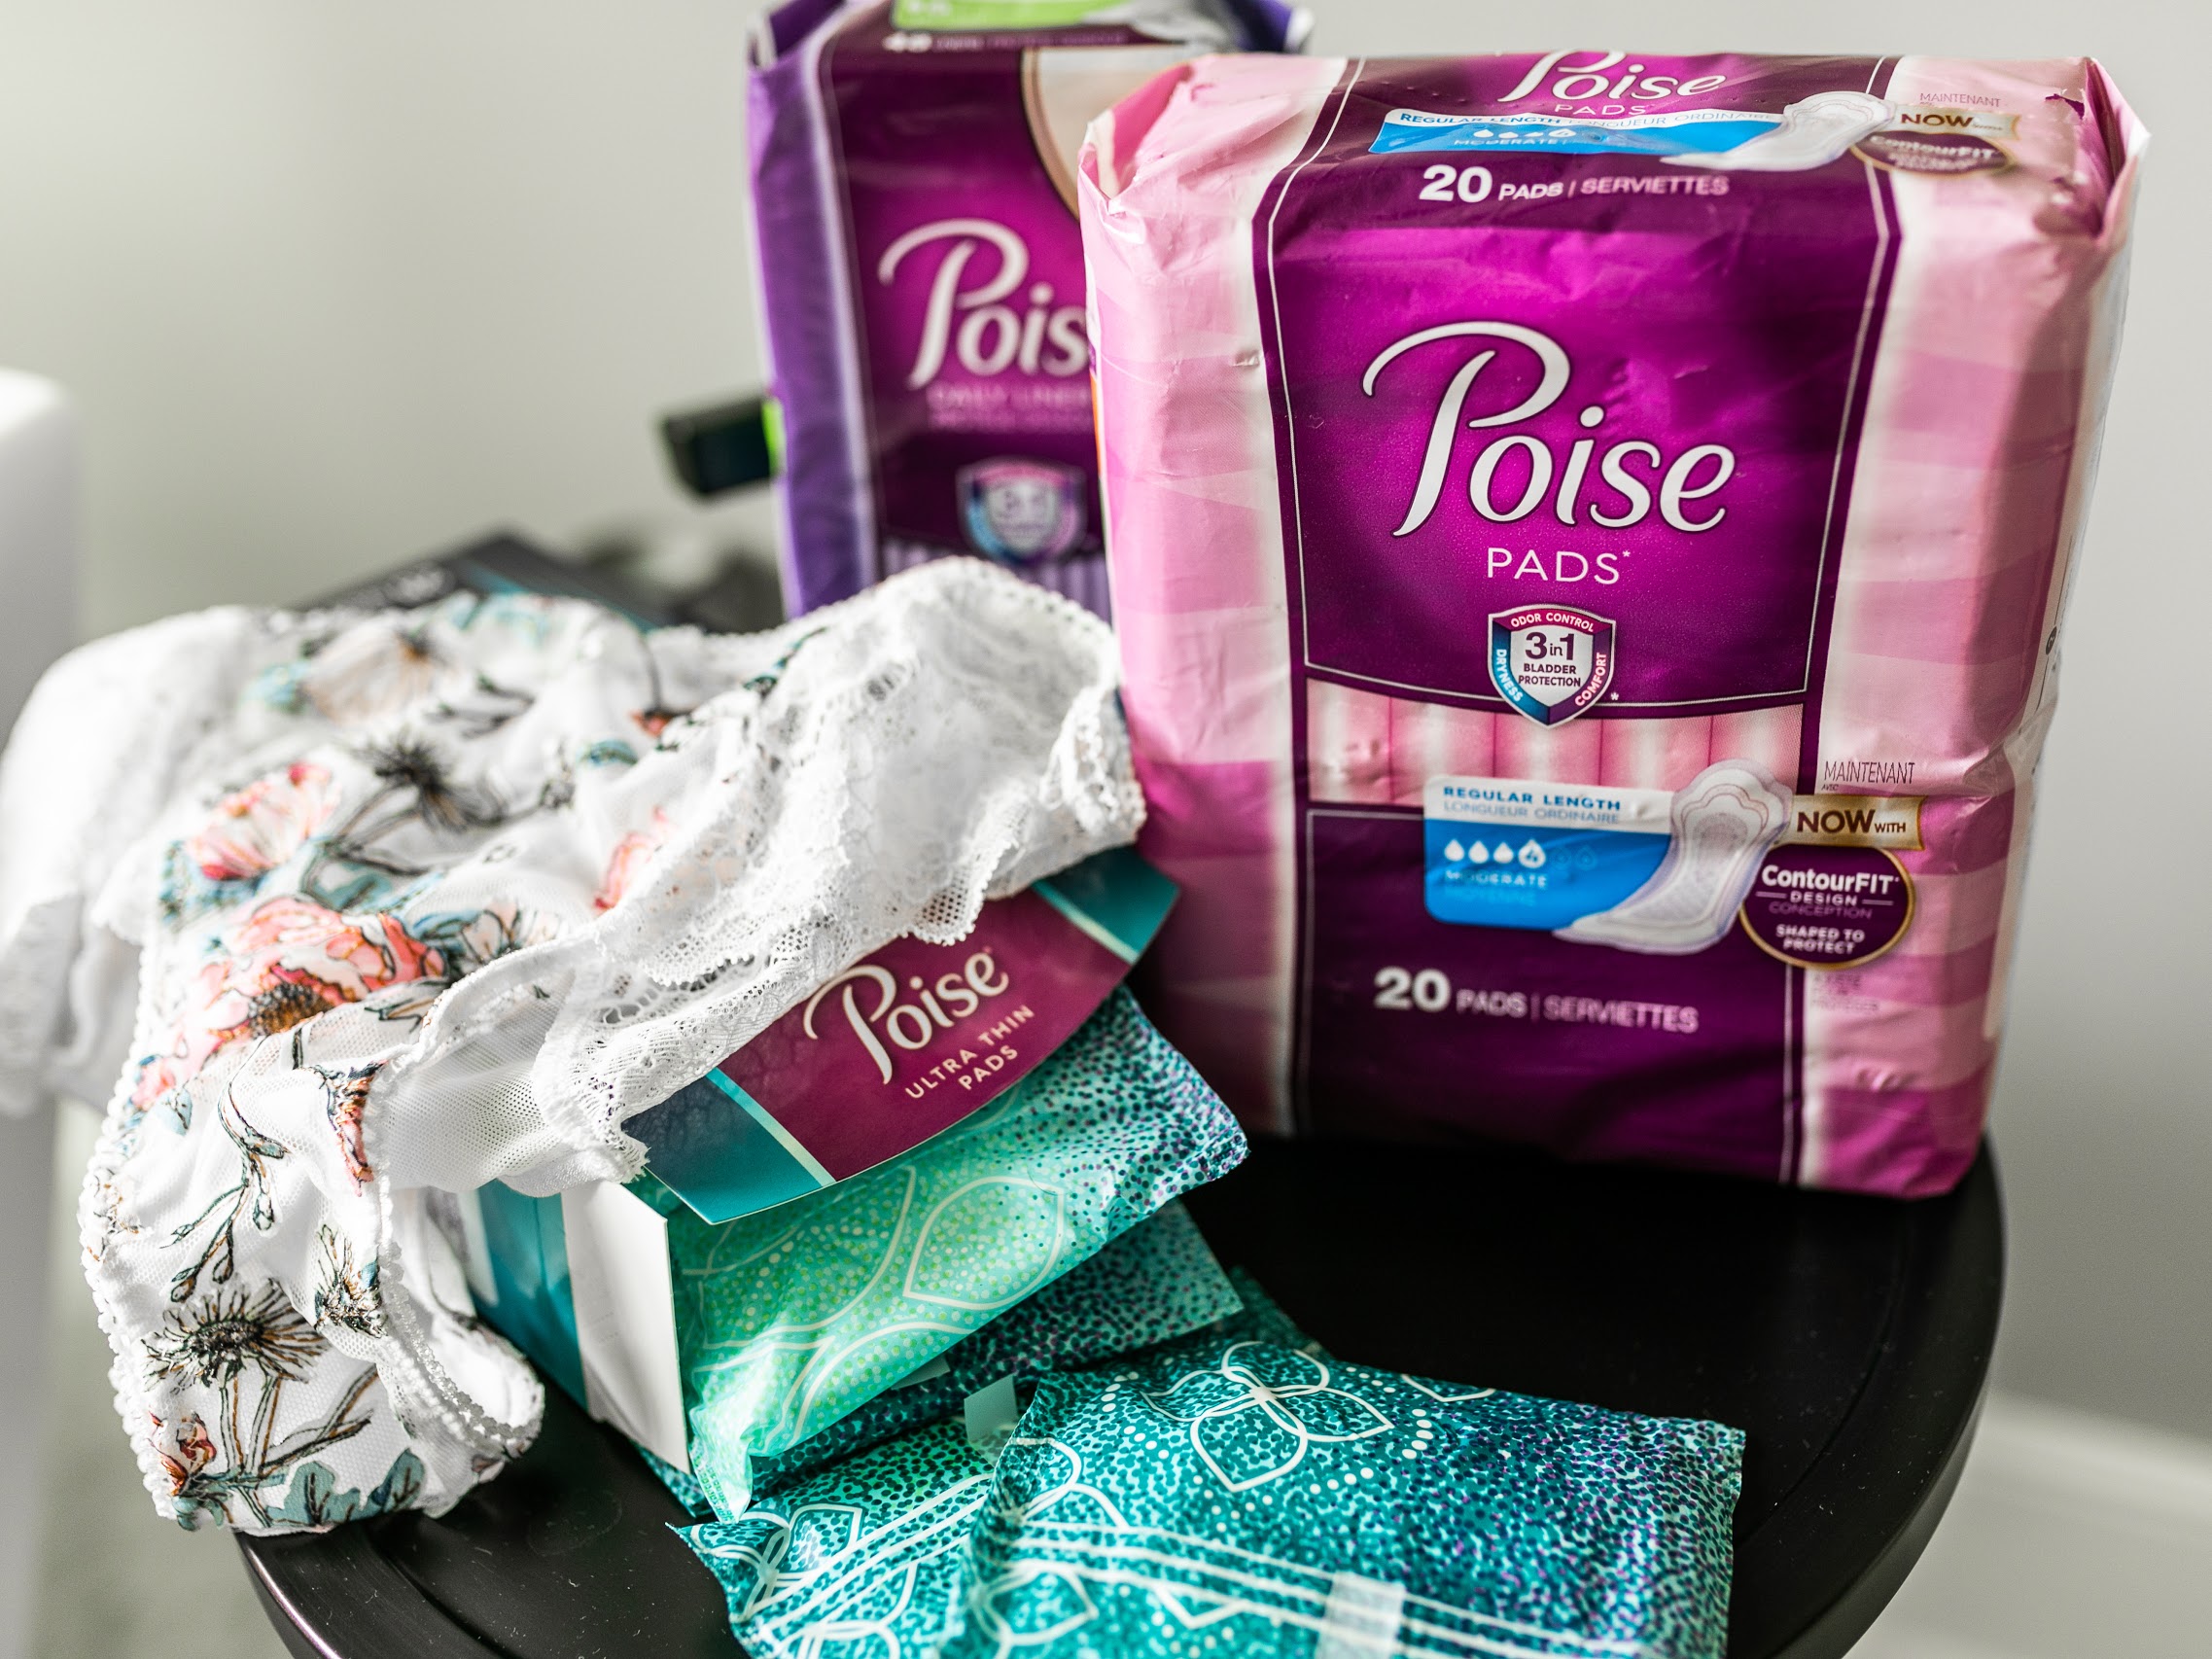 Don't Miss The Big Savings On Poise Products At Publix on I Heart Publix